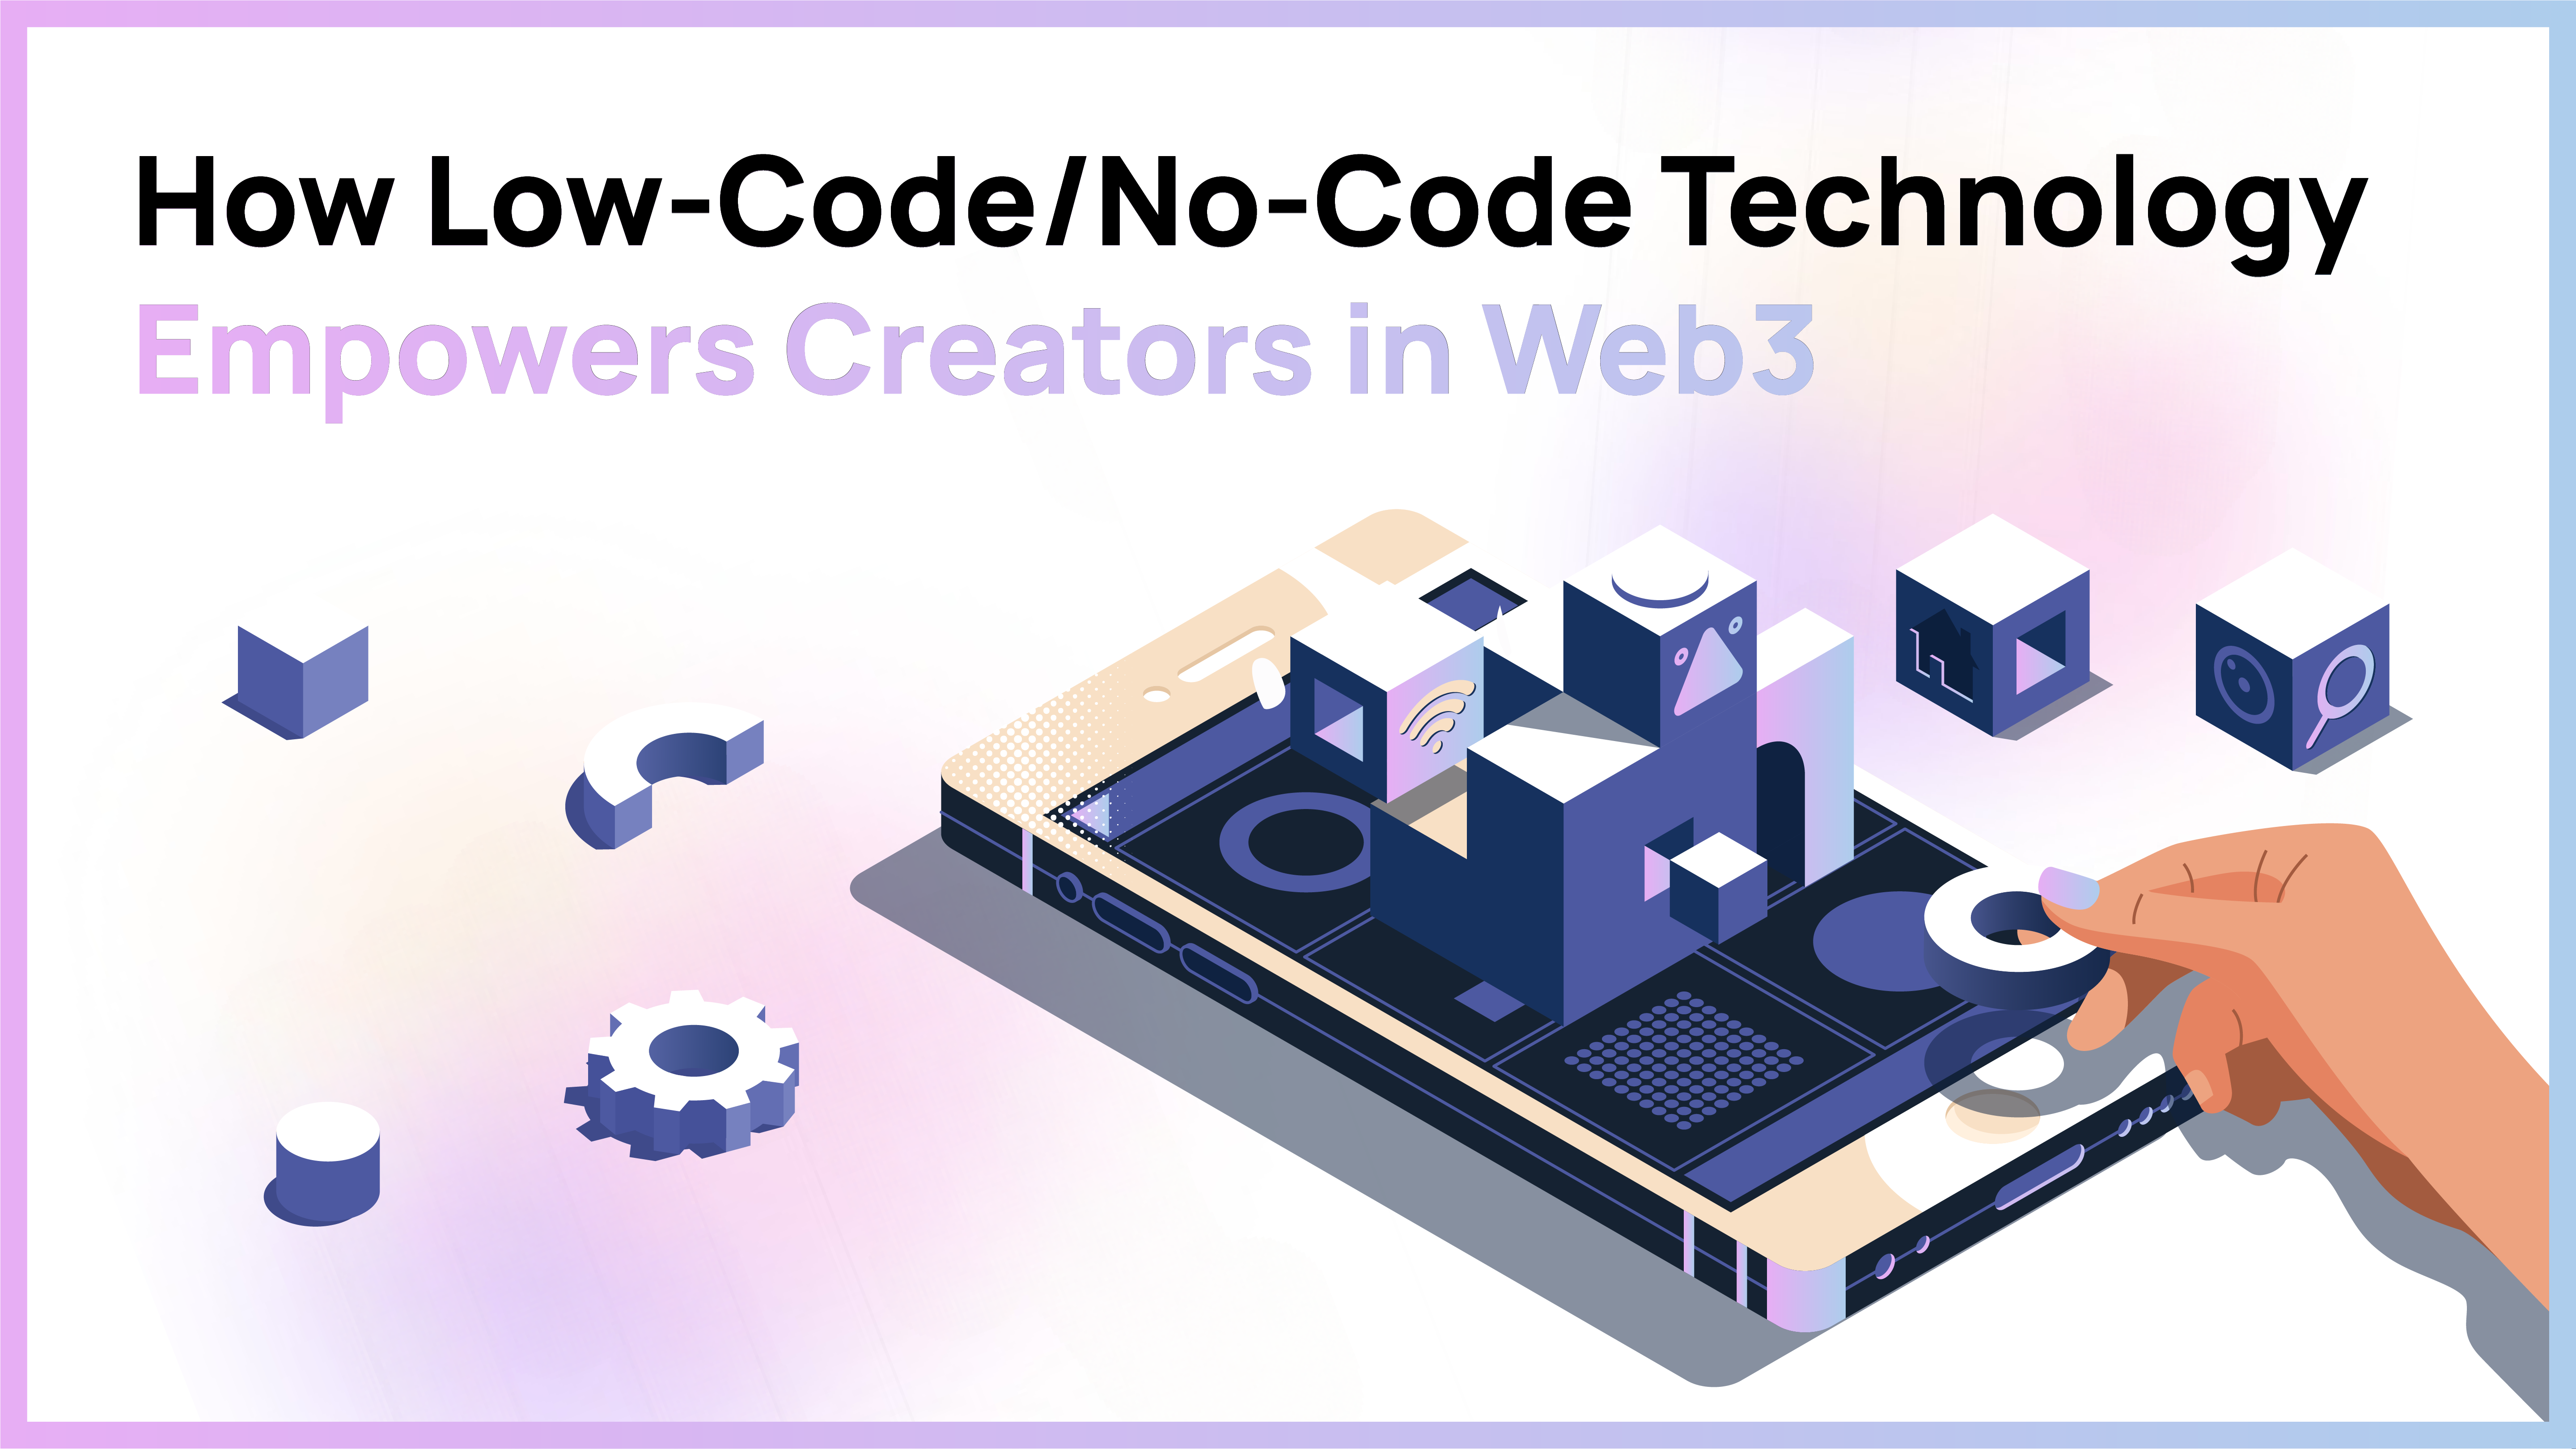 How Low-Code/No-Code Technology Empowers Creators in Web3